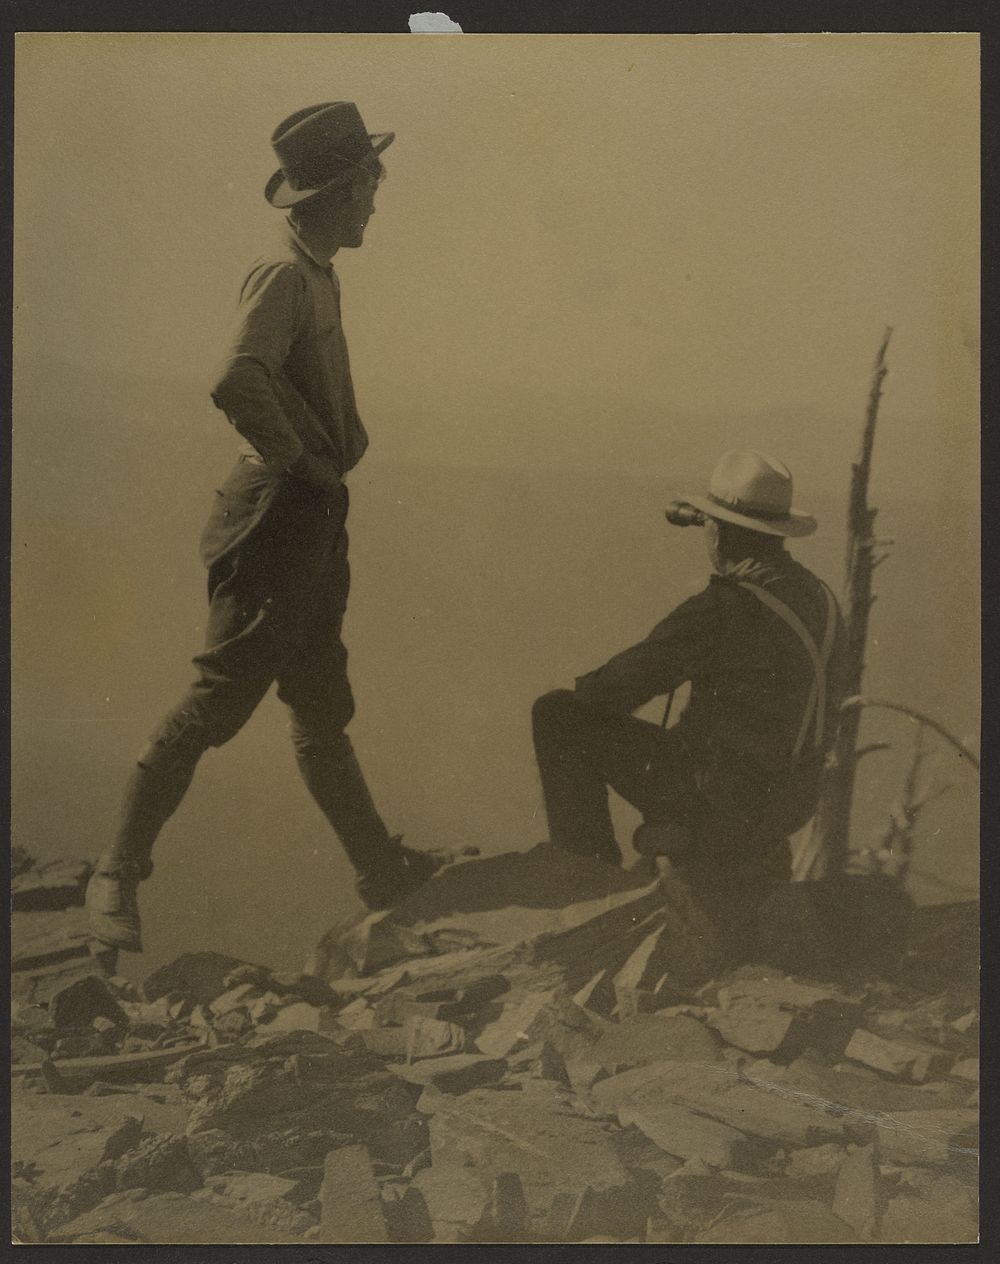 Two Men Looking in the Distance (Possibly Old Baldy Peak) by Louis Fleckenstein